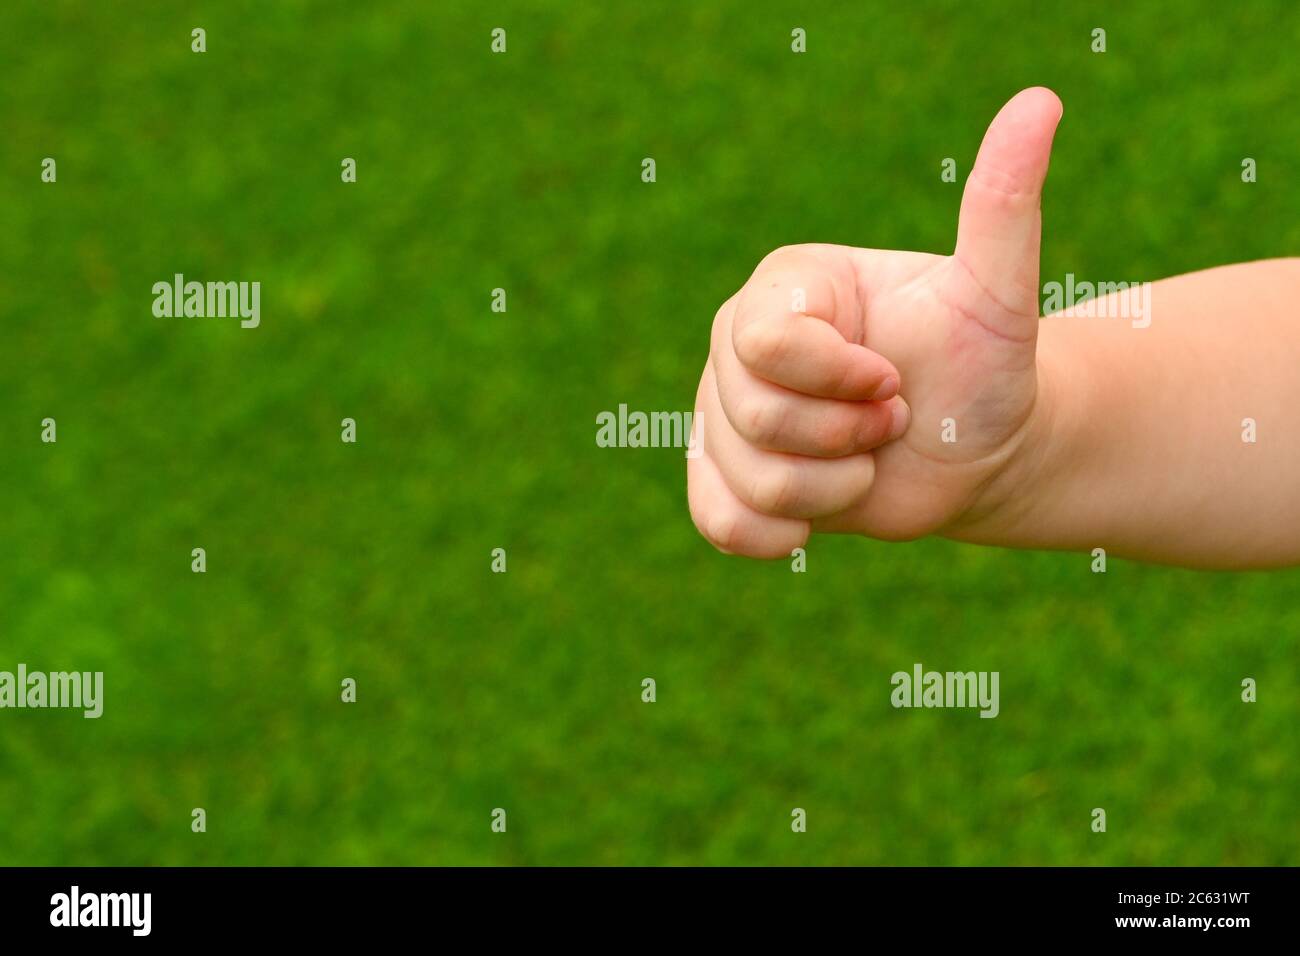 Thumbs up sign from a young person against a plain green background. Copy space. Stock Photo